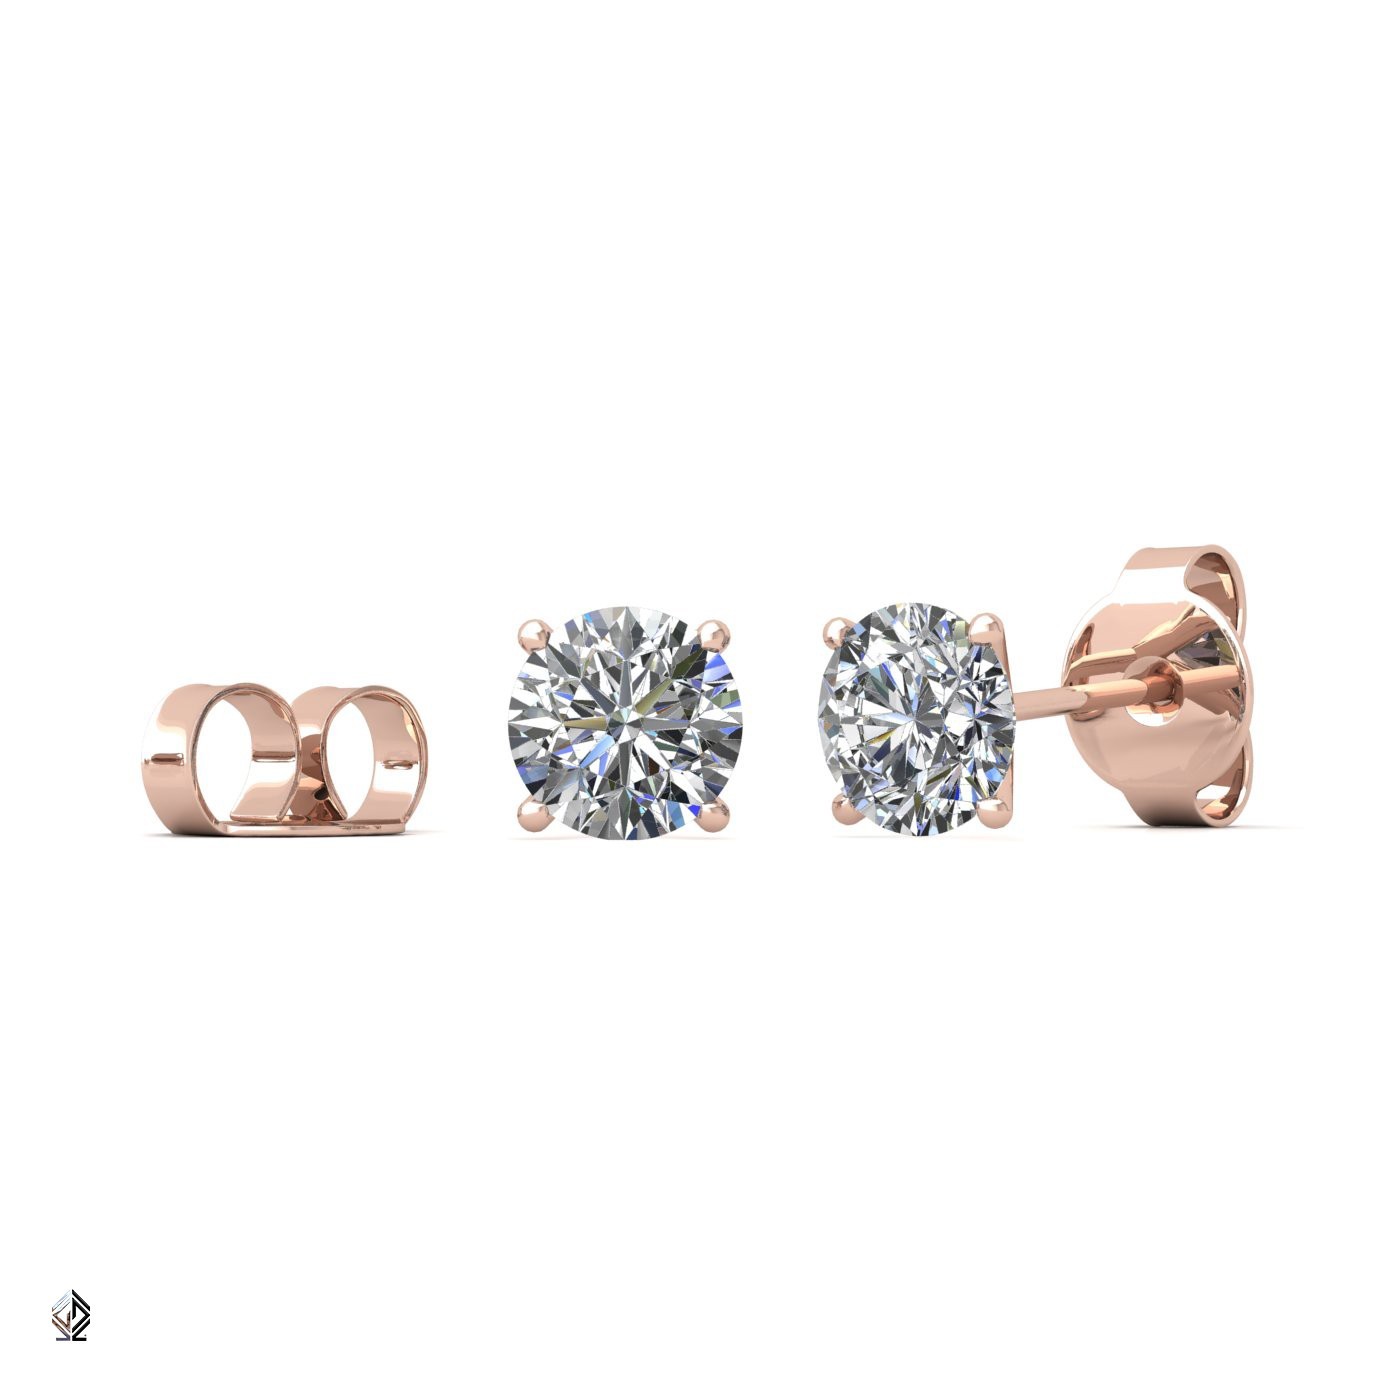 18k rose gold 2.5 ct each (5,0 tcw) 4 prongs round cut classic diamond earring studs Photos & images